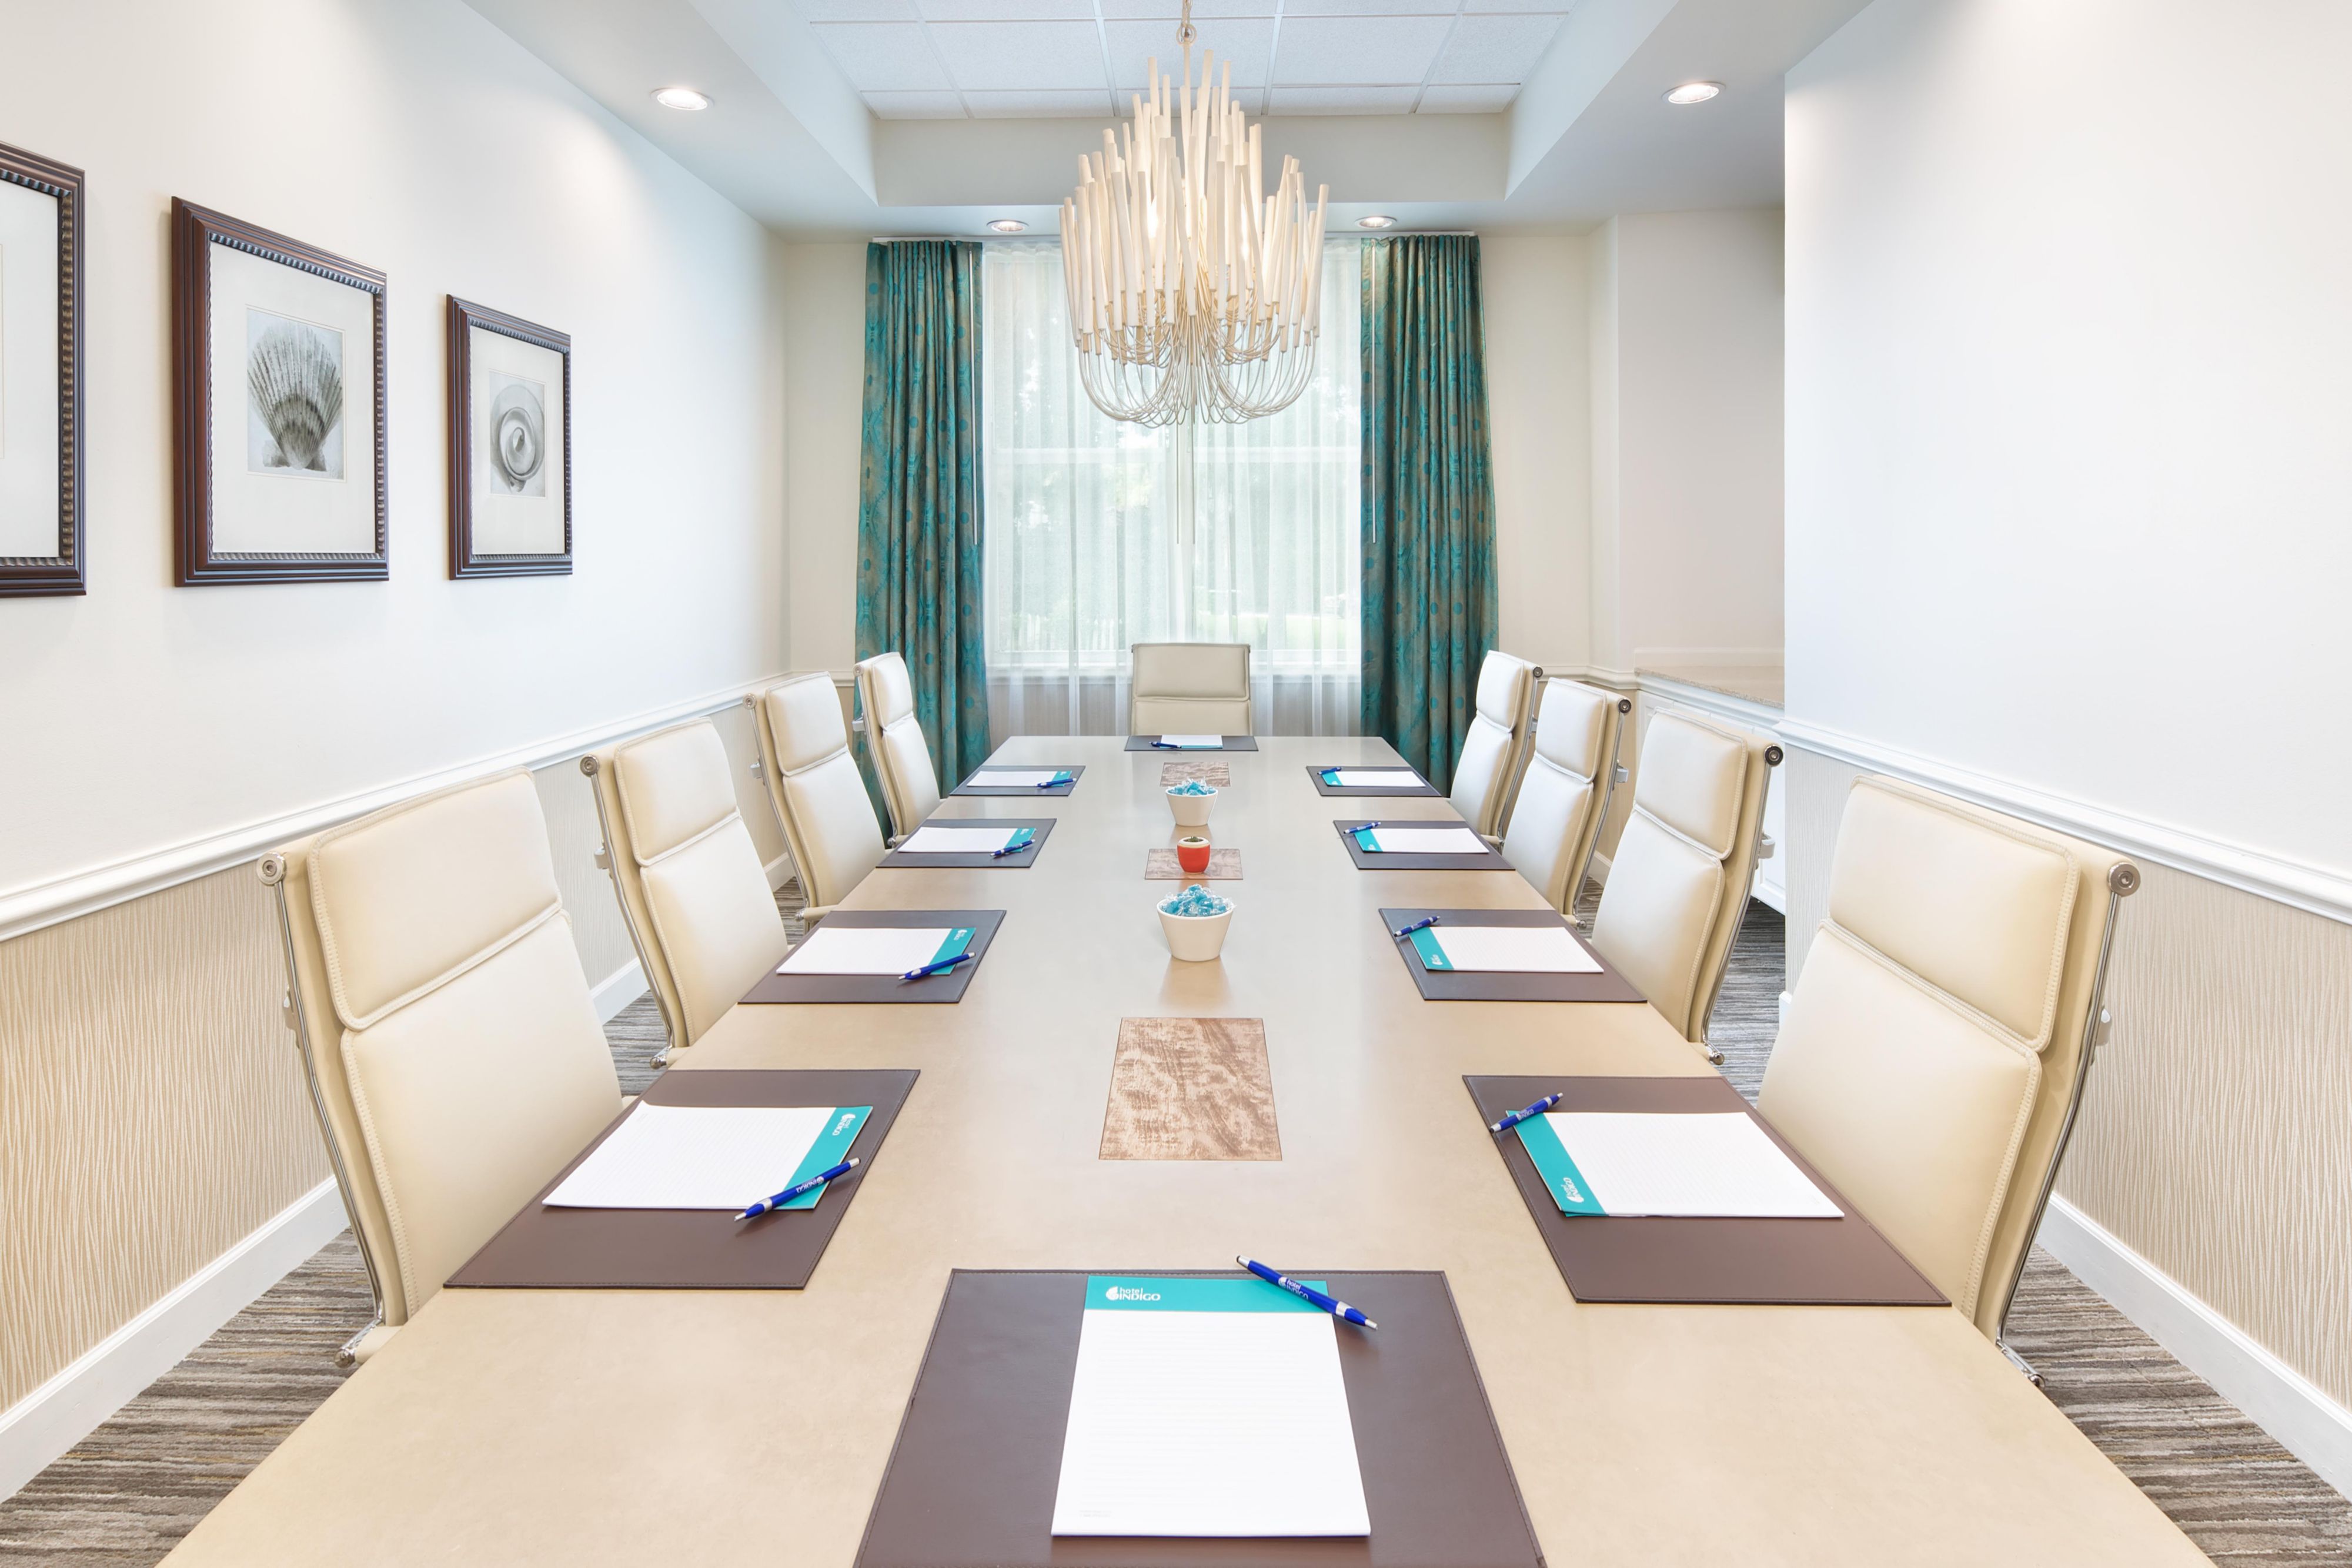 Book your next Meeting or Event with us and enjoy unparalleled personalized service. From start to finish our experts are here to help your meeting or event be successful and memorable. Call our Sales office (941) 487-3800 to learn more about the Hotel Indigo difference.